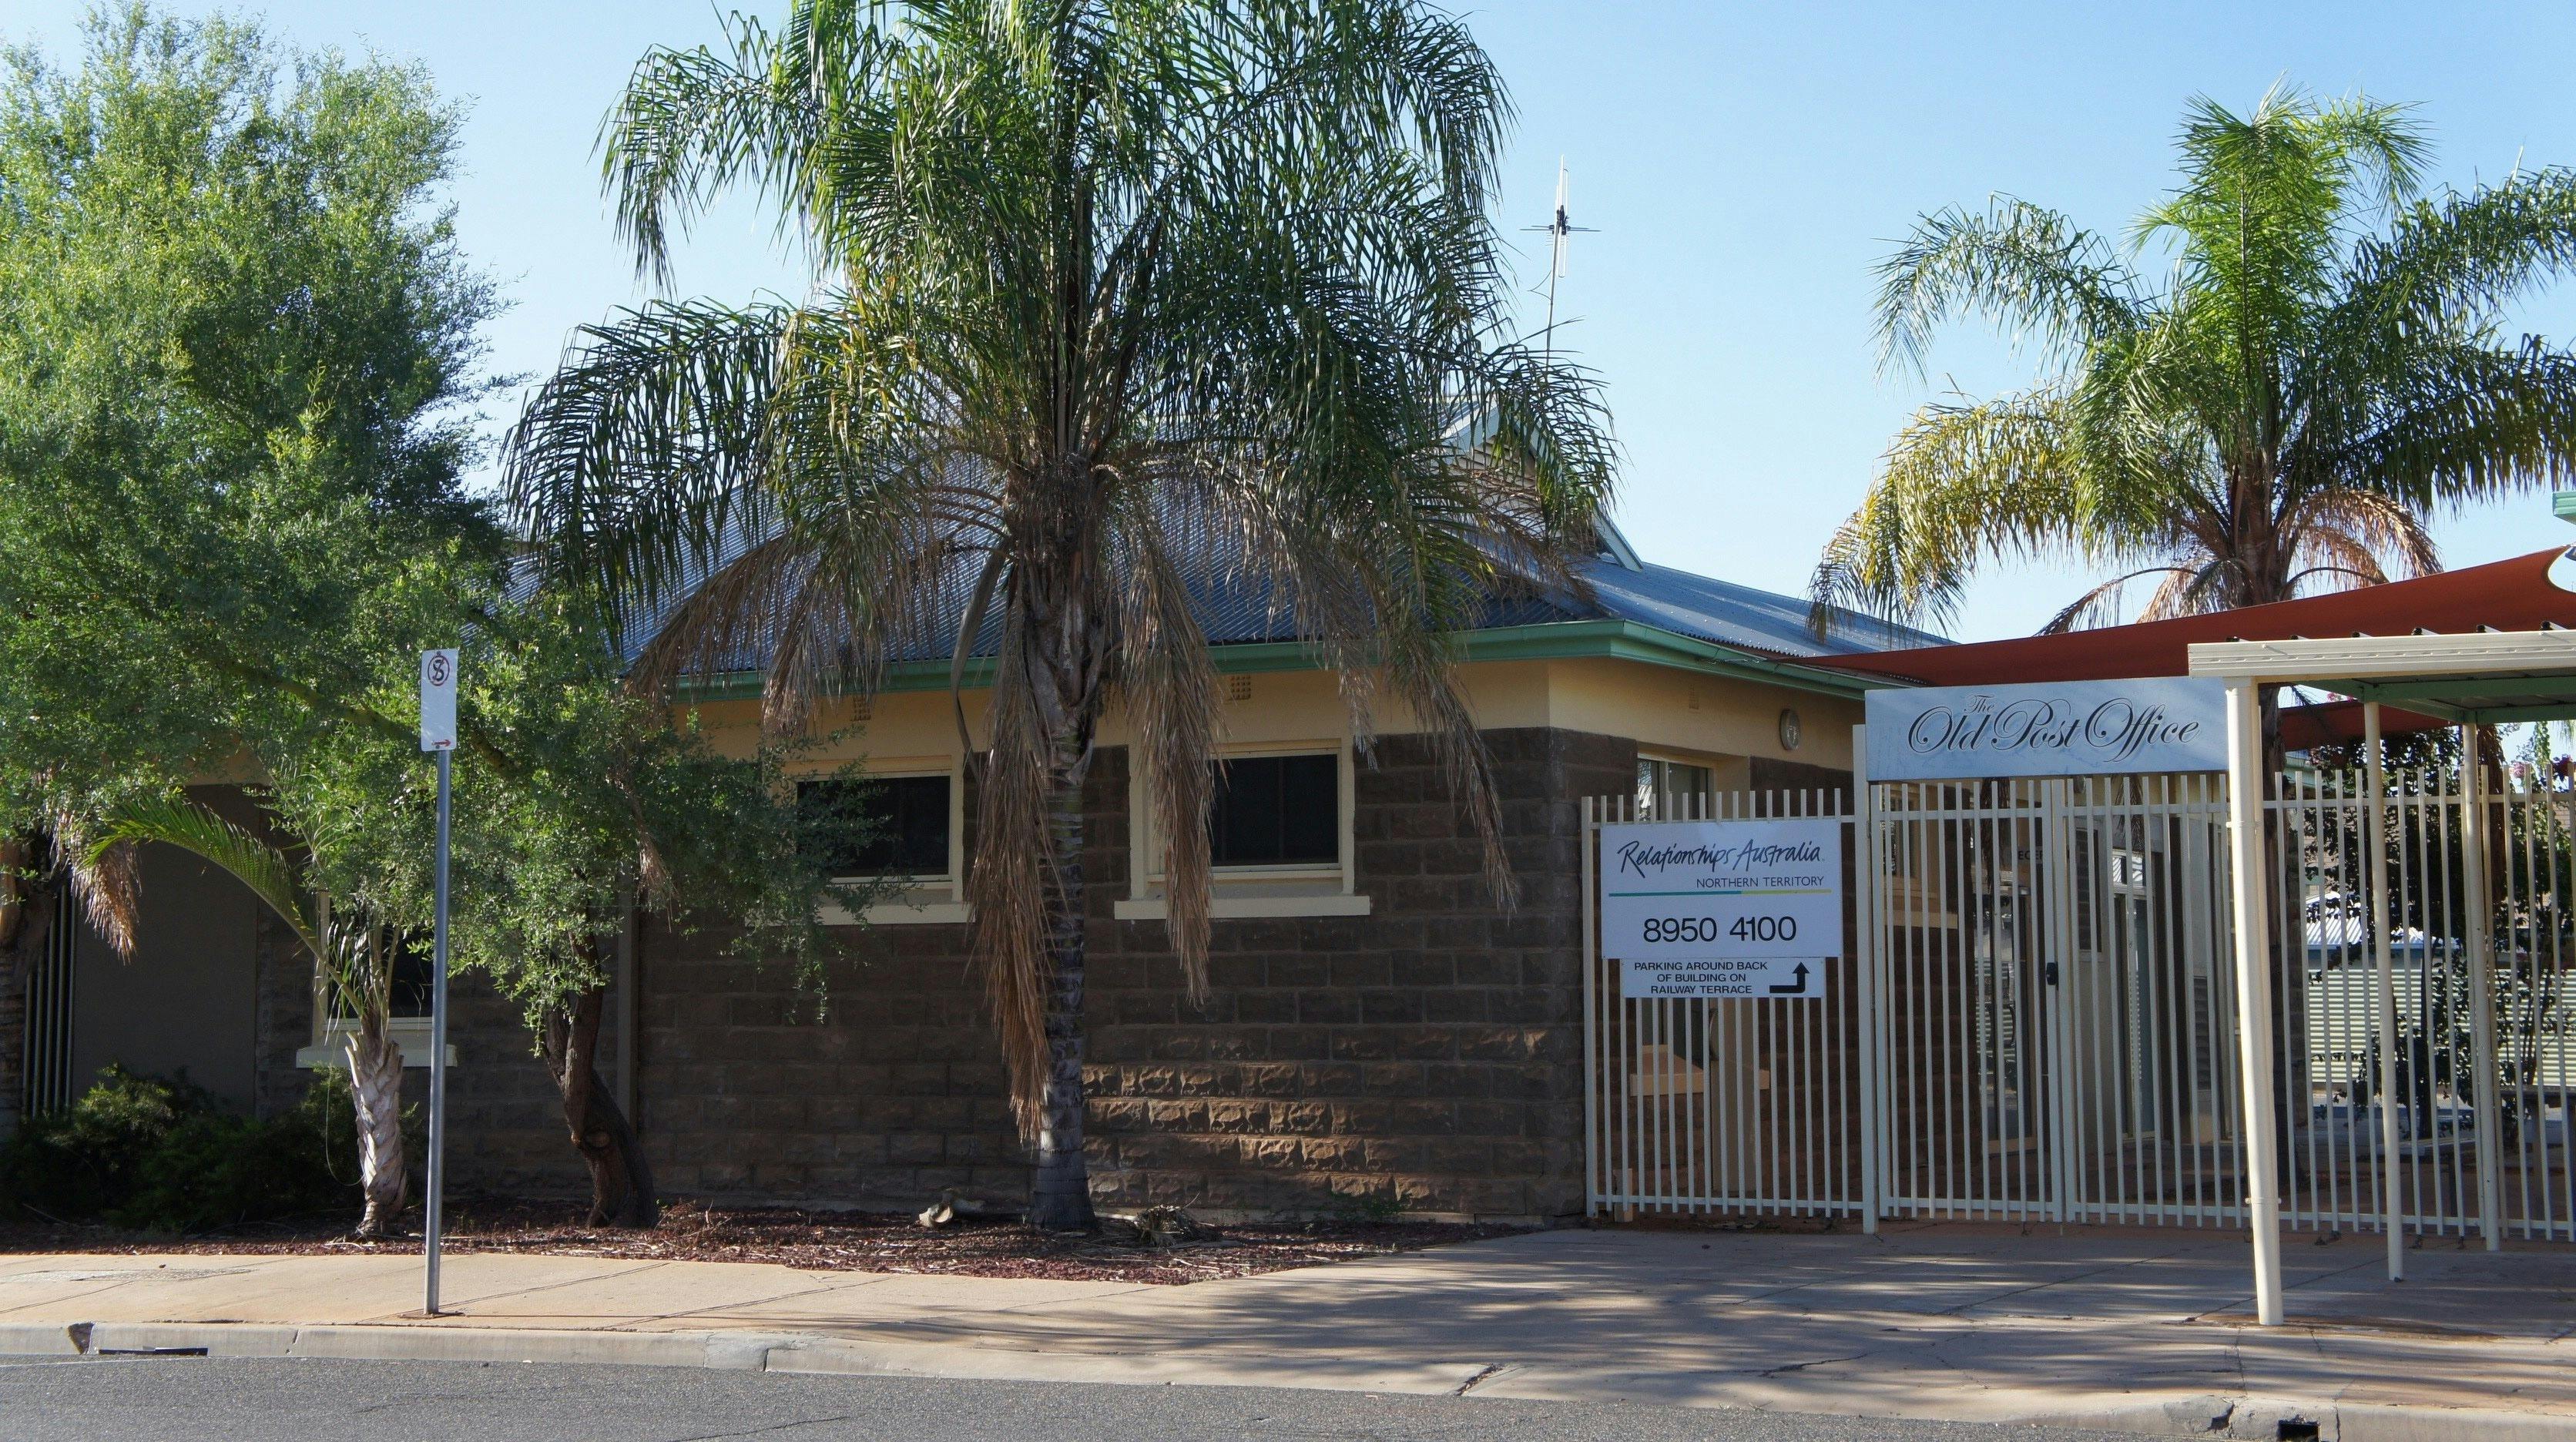 Former Alice Springs Telegraph Repeater Station and Post Office.